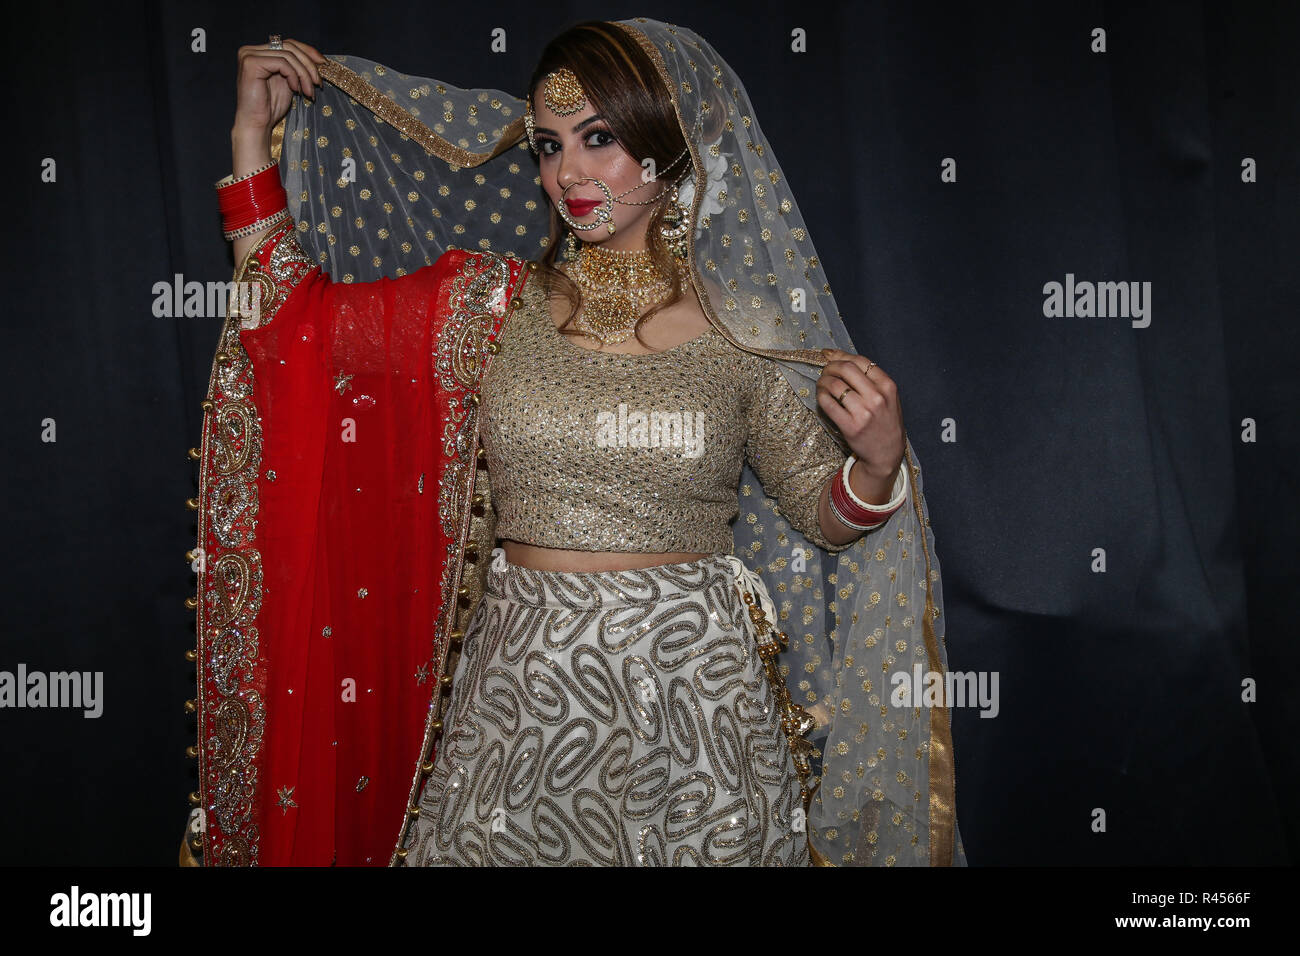 https://c8.alamy.com/comp/R4566F/london-uk-25-november-2018-indian-brides-posing-at-the-asian-wedding-show-2018-showing-the-lovely-colours-of-india-the-jewellery-make-up-and-hair-event-held-at-the-recreation-byron-hall-harrow-london-@paul-quezada-neimanalamy-live-news-R4566F.jpg